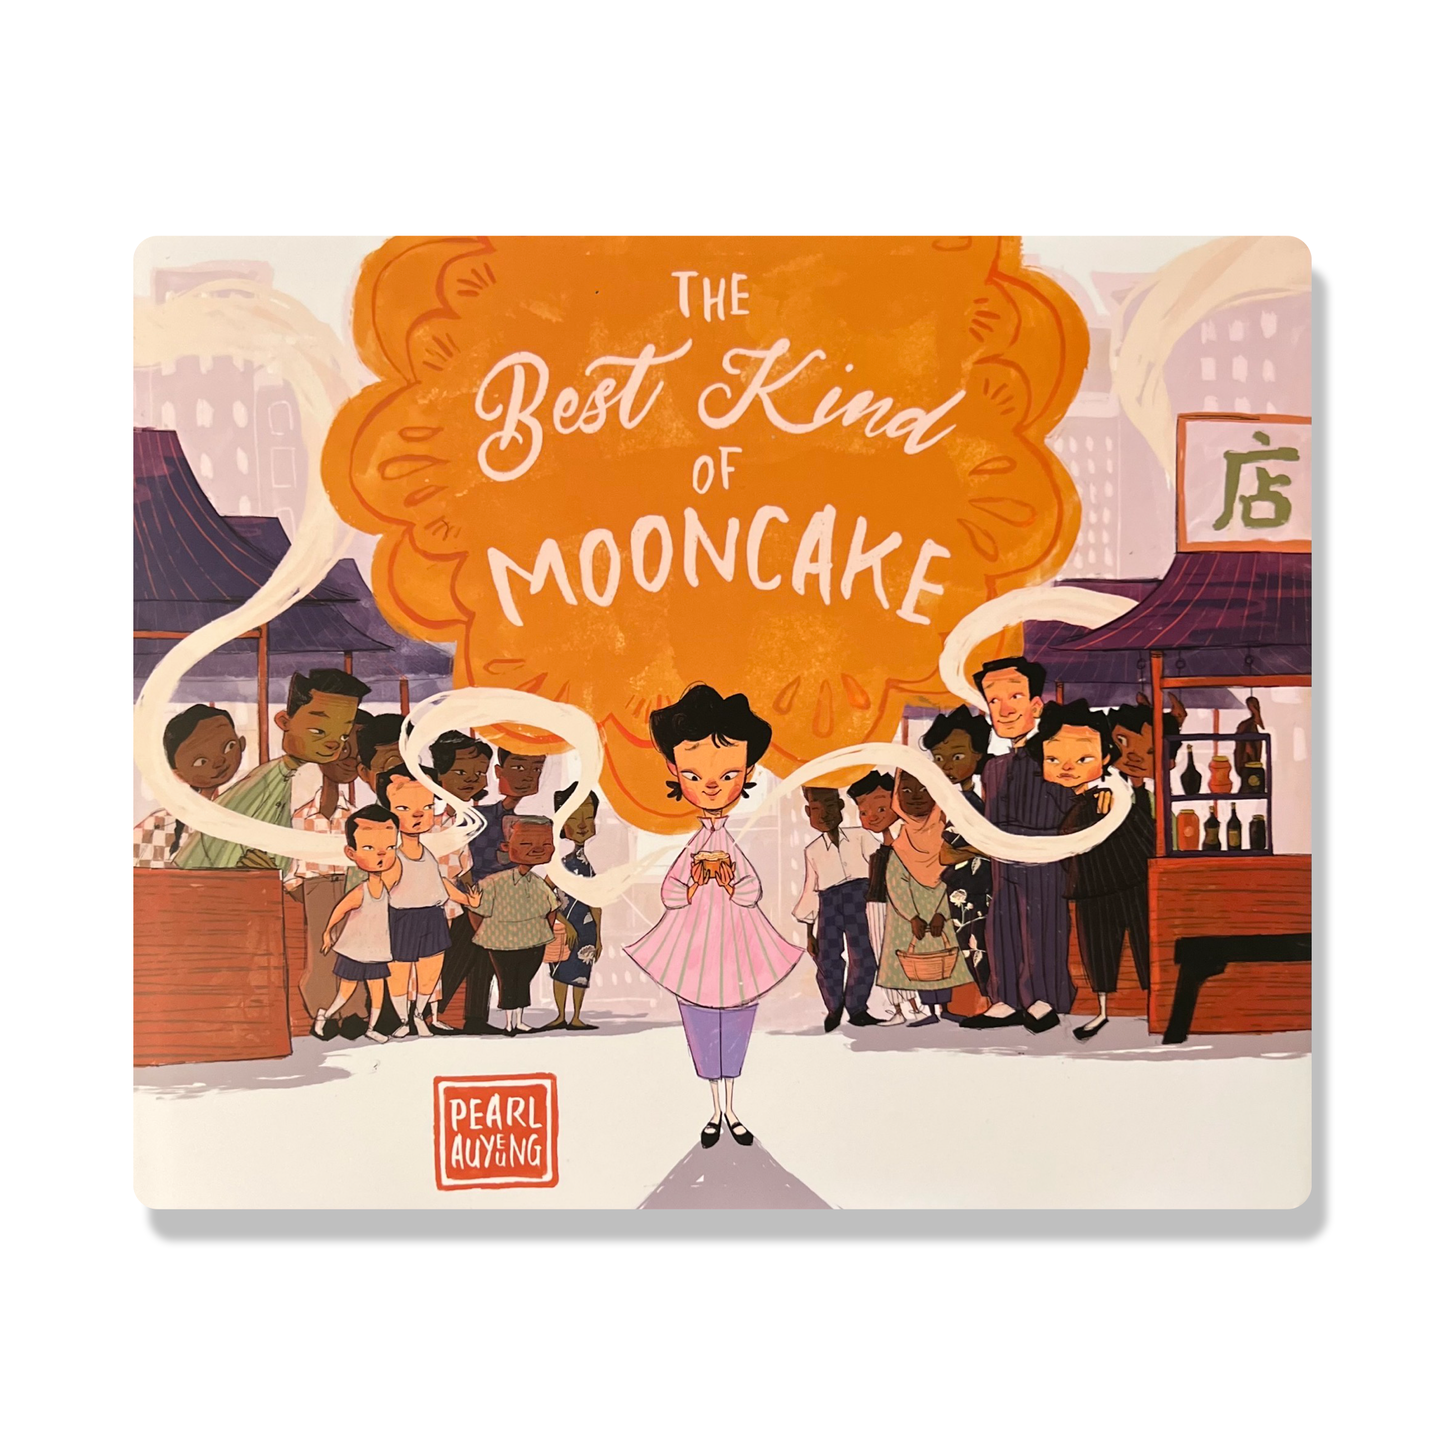 The Best Kind of Mooncake